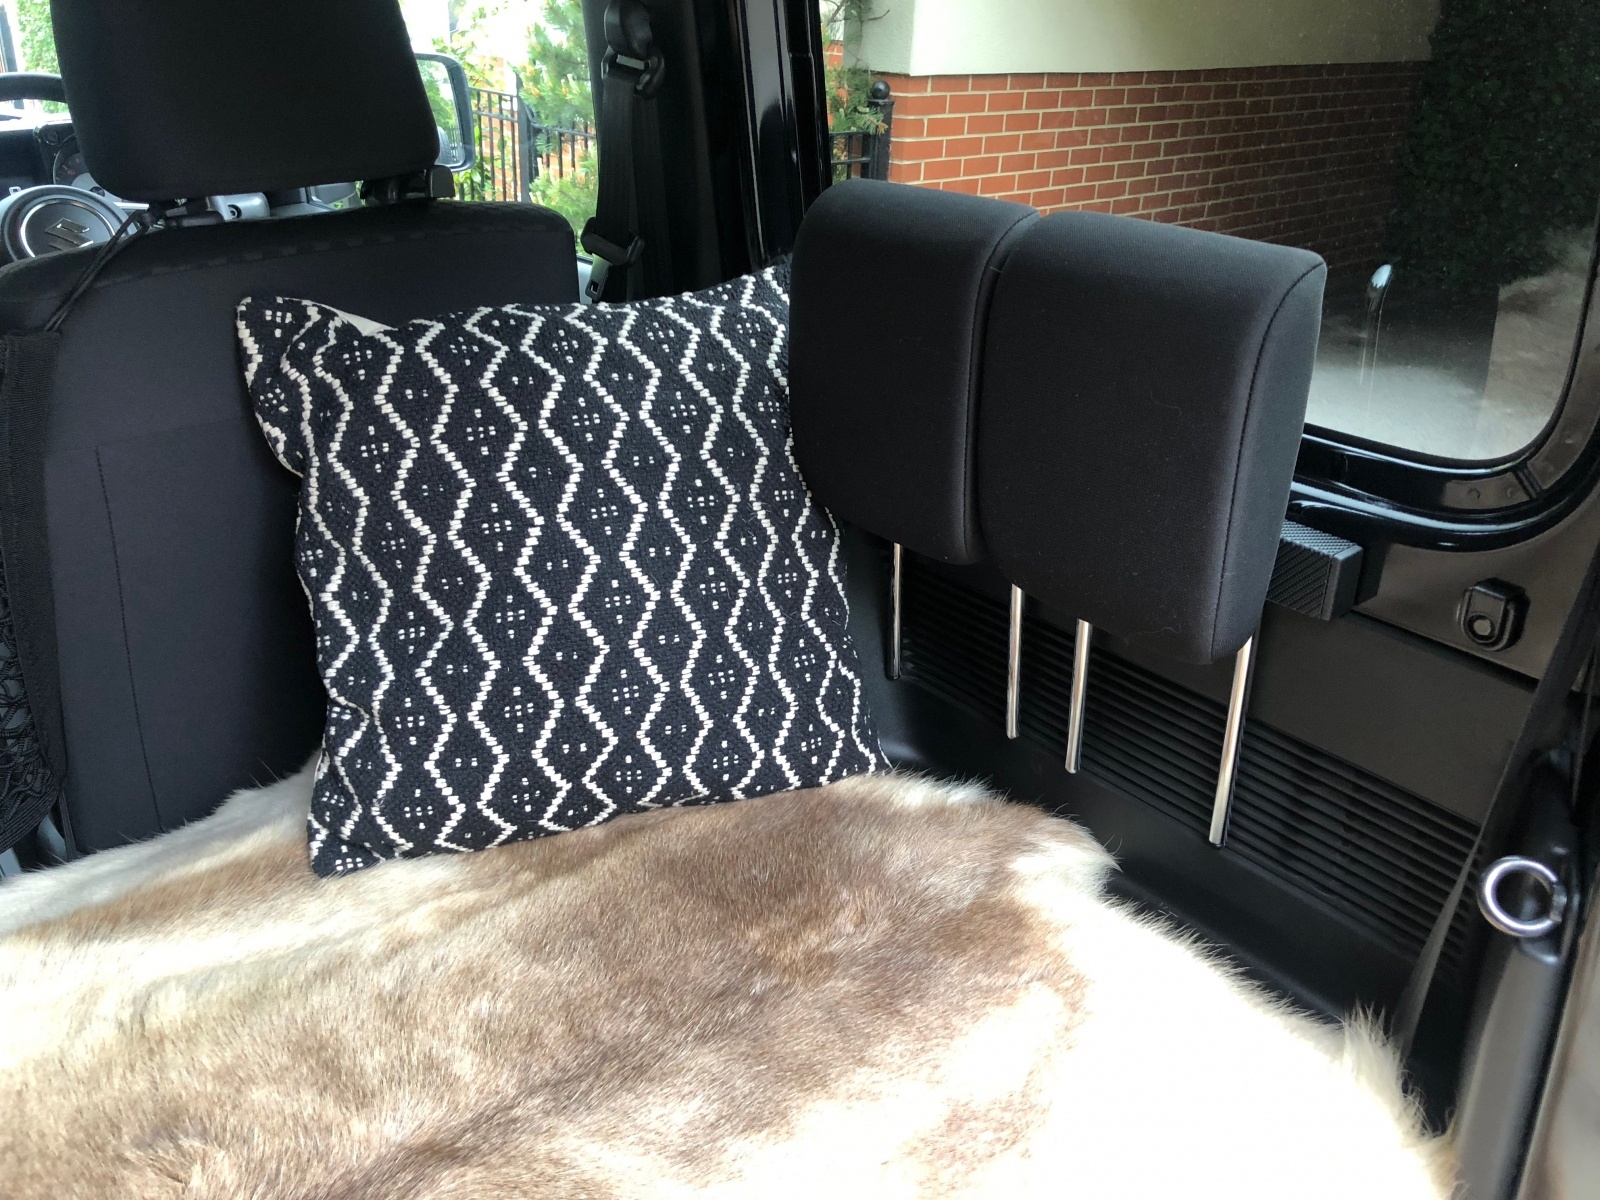 Rear Headrests Used As A Backrest